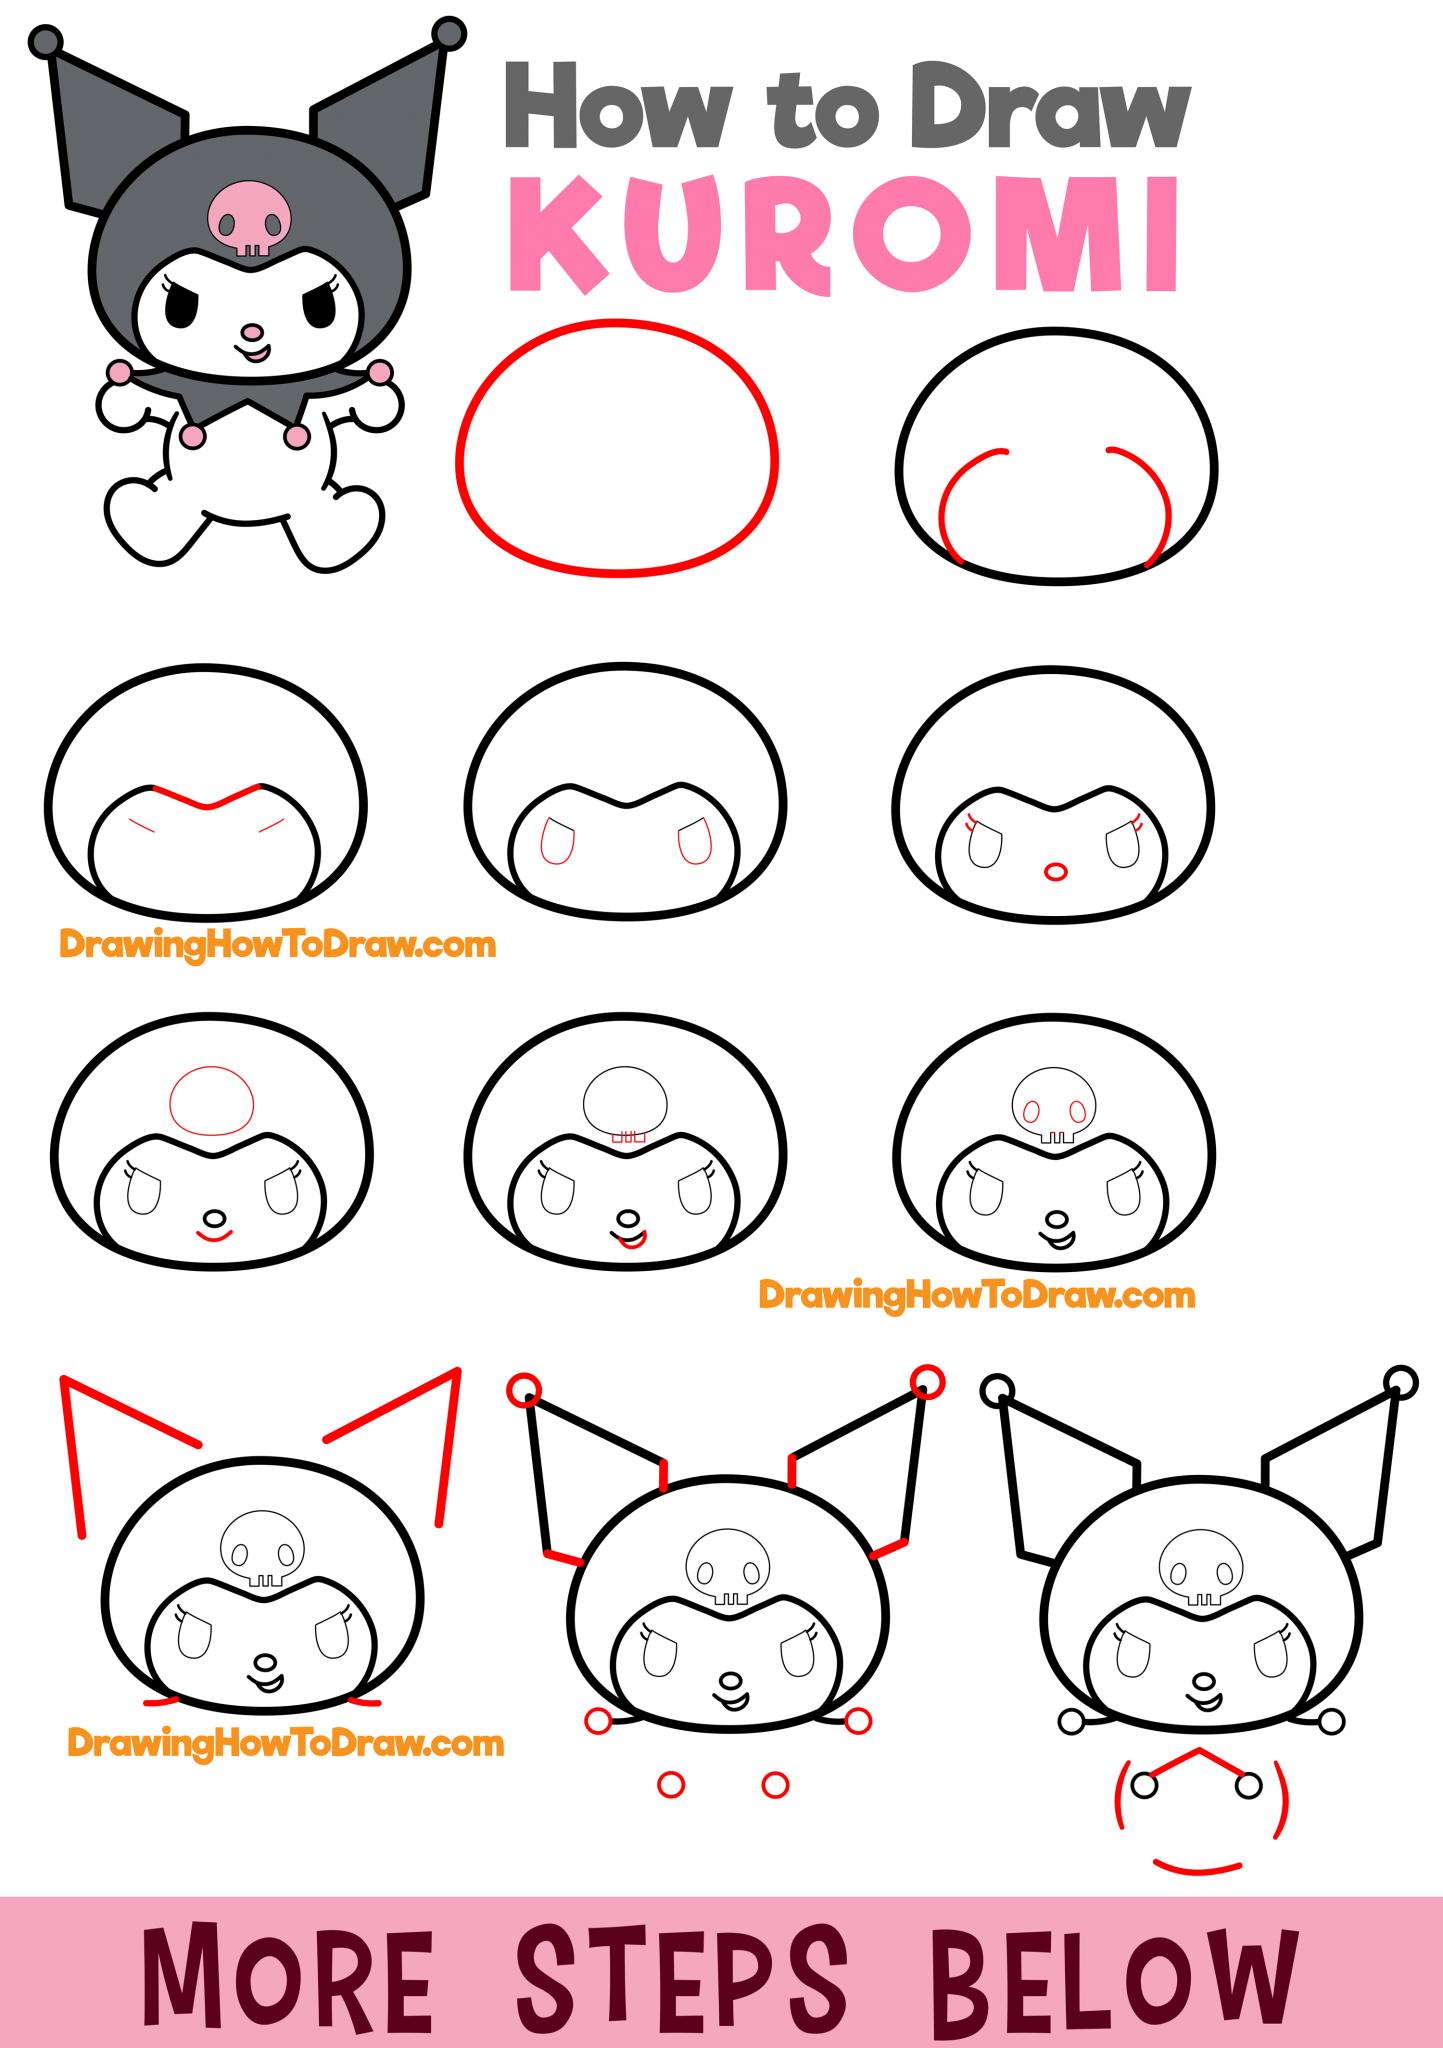 How to Draw Kuromi from My Melody and Hello Kitty Easy Step by Step ...